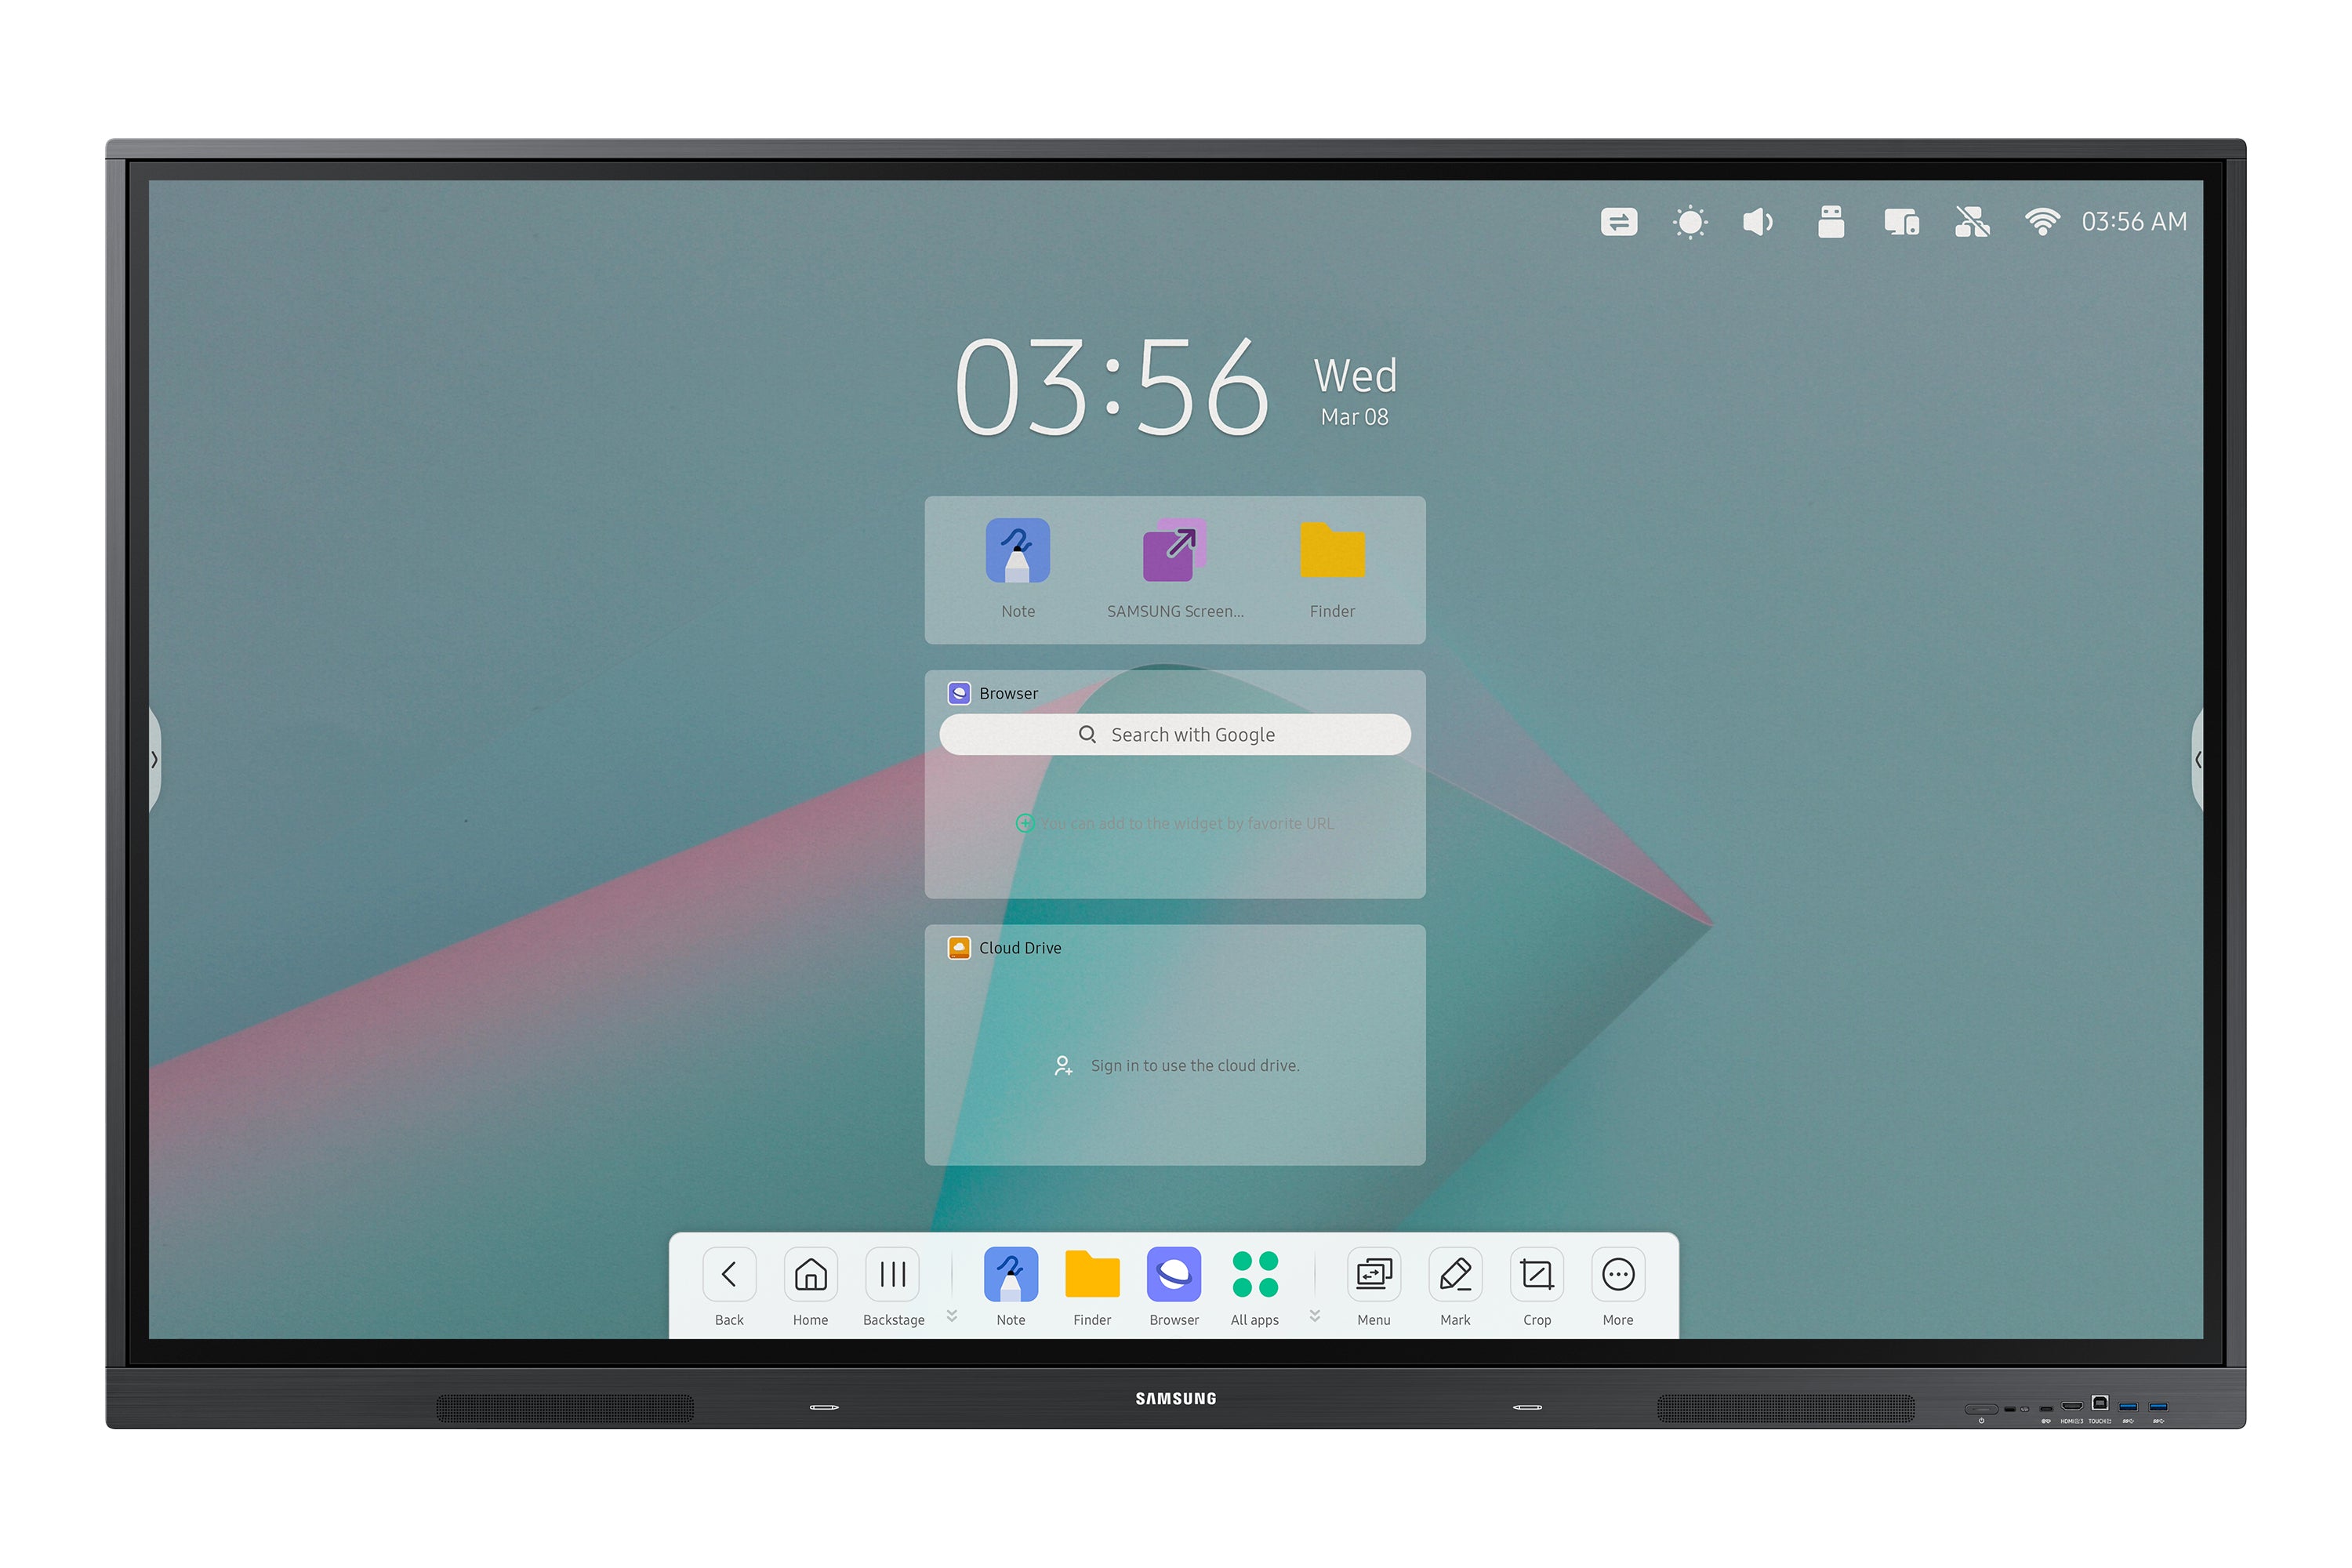 SAMSUNG WAC EBOARD WA65C, 65", ANDROID 11, UHD, IR TOUCH, 3XHDMI (CEC) 2.0, USB-C PD 65W, VIDEO OUT HDMI, USB 5(2.0X1, 4X3.0), RS232 IN/OUT, RJ45 IN/OUT, OPS SLOT